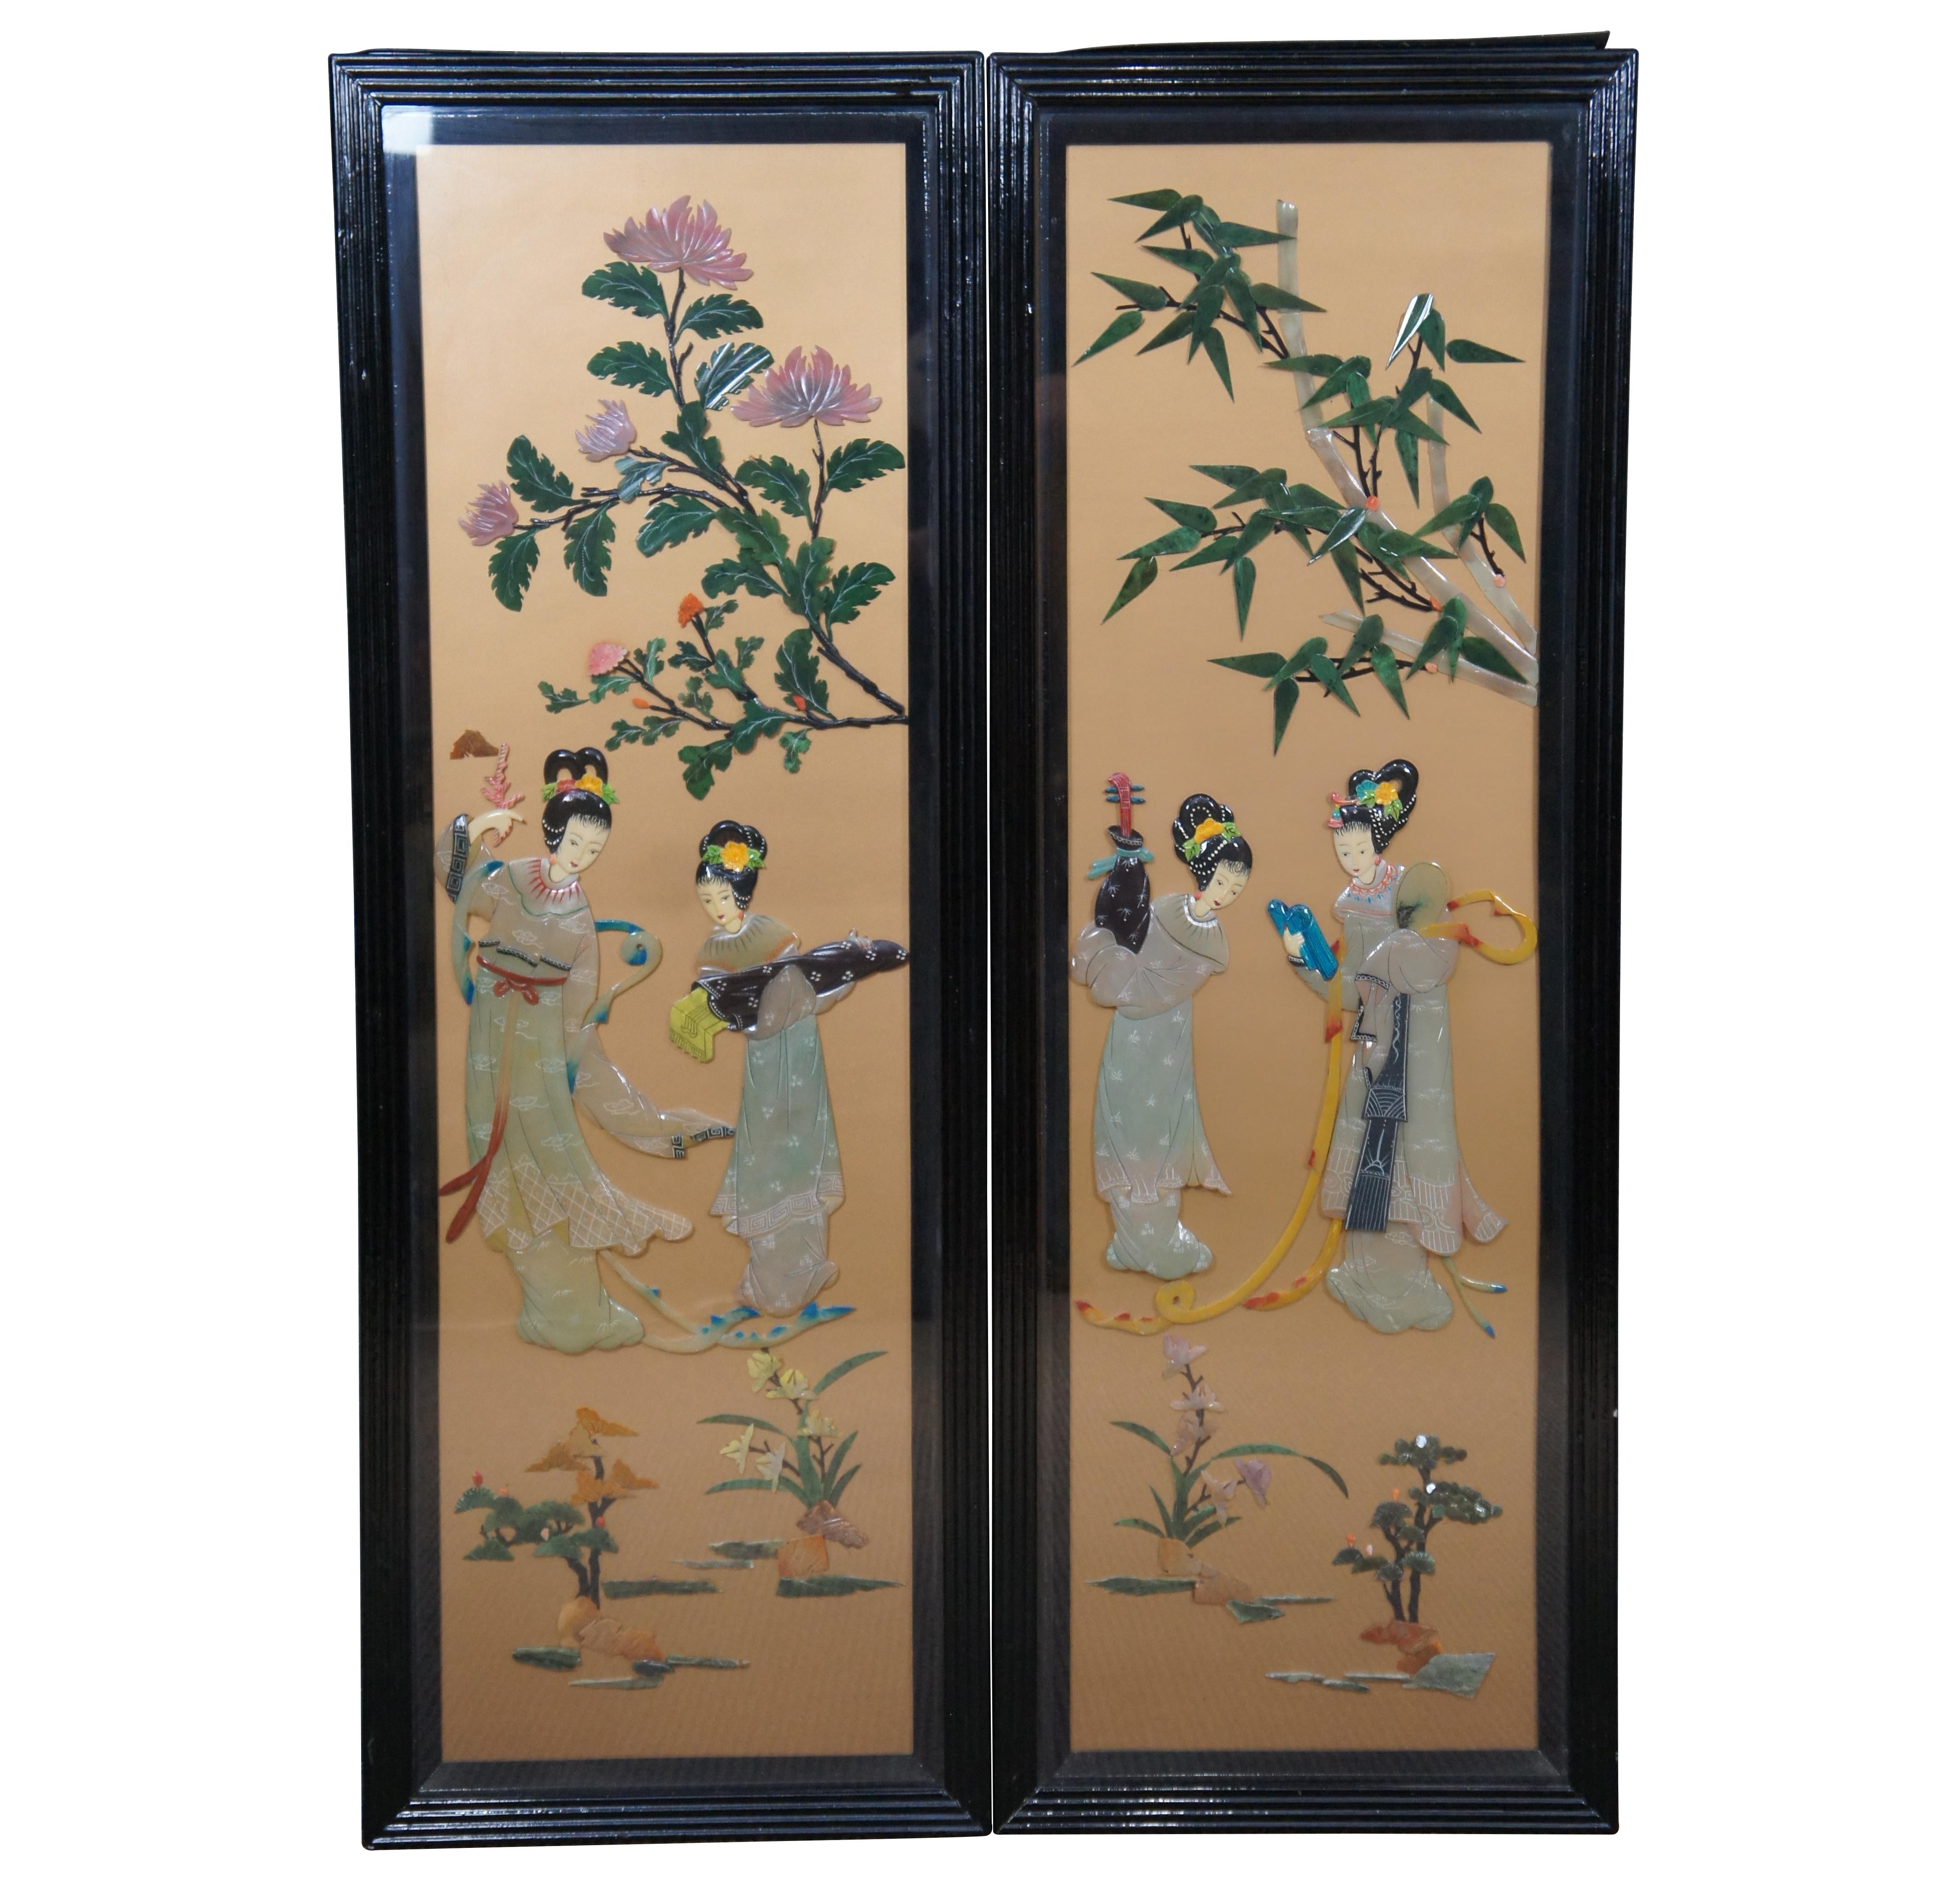 Set of four Mid-20th Century Japanese chinoiserie panels in black lacquered wood with gilded backgrounds, featuring pairs of female Geisha figures in traditional attire holding scrolls, tea sets, instruments, fans, under a variety of trees,